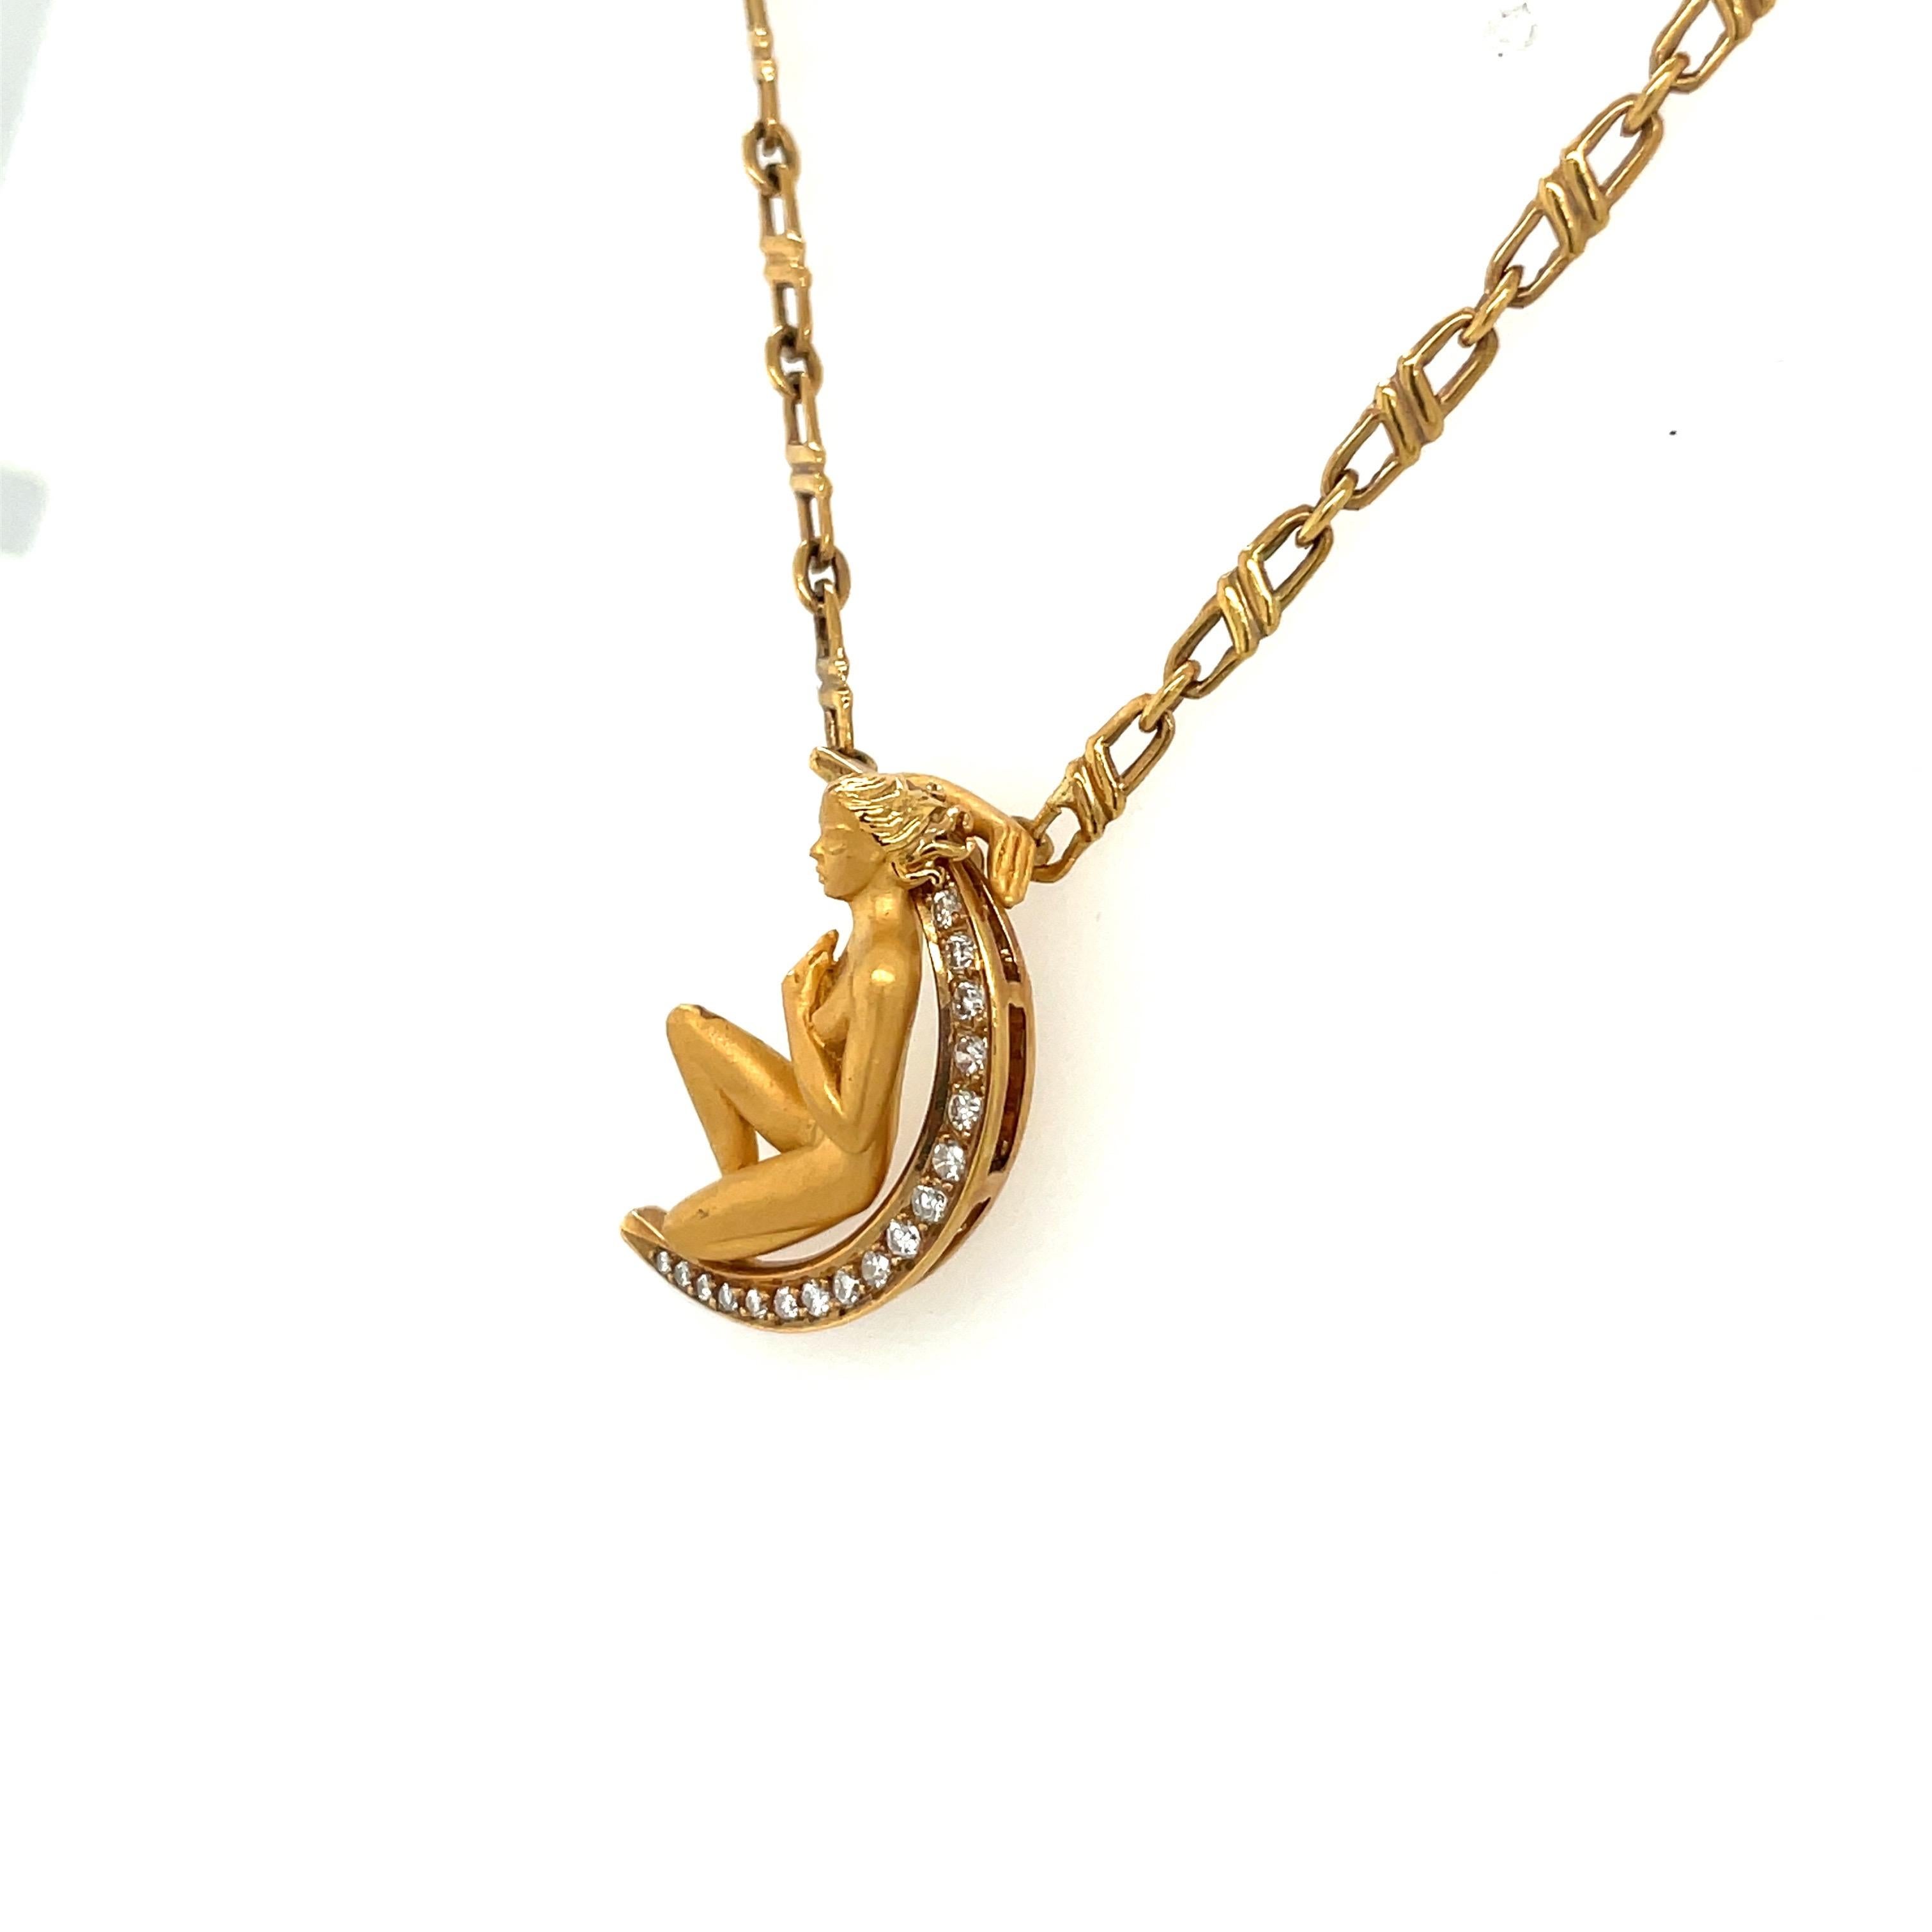 Carrera Y Carrera has built its its famous name on figurative designs, an obsession with surface finishes, and a compelling way of seeing beauty in art and nature.
This 18 karat yellow gold pendant is the perfect example of Carrera's iconic work. A